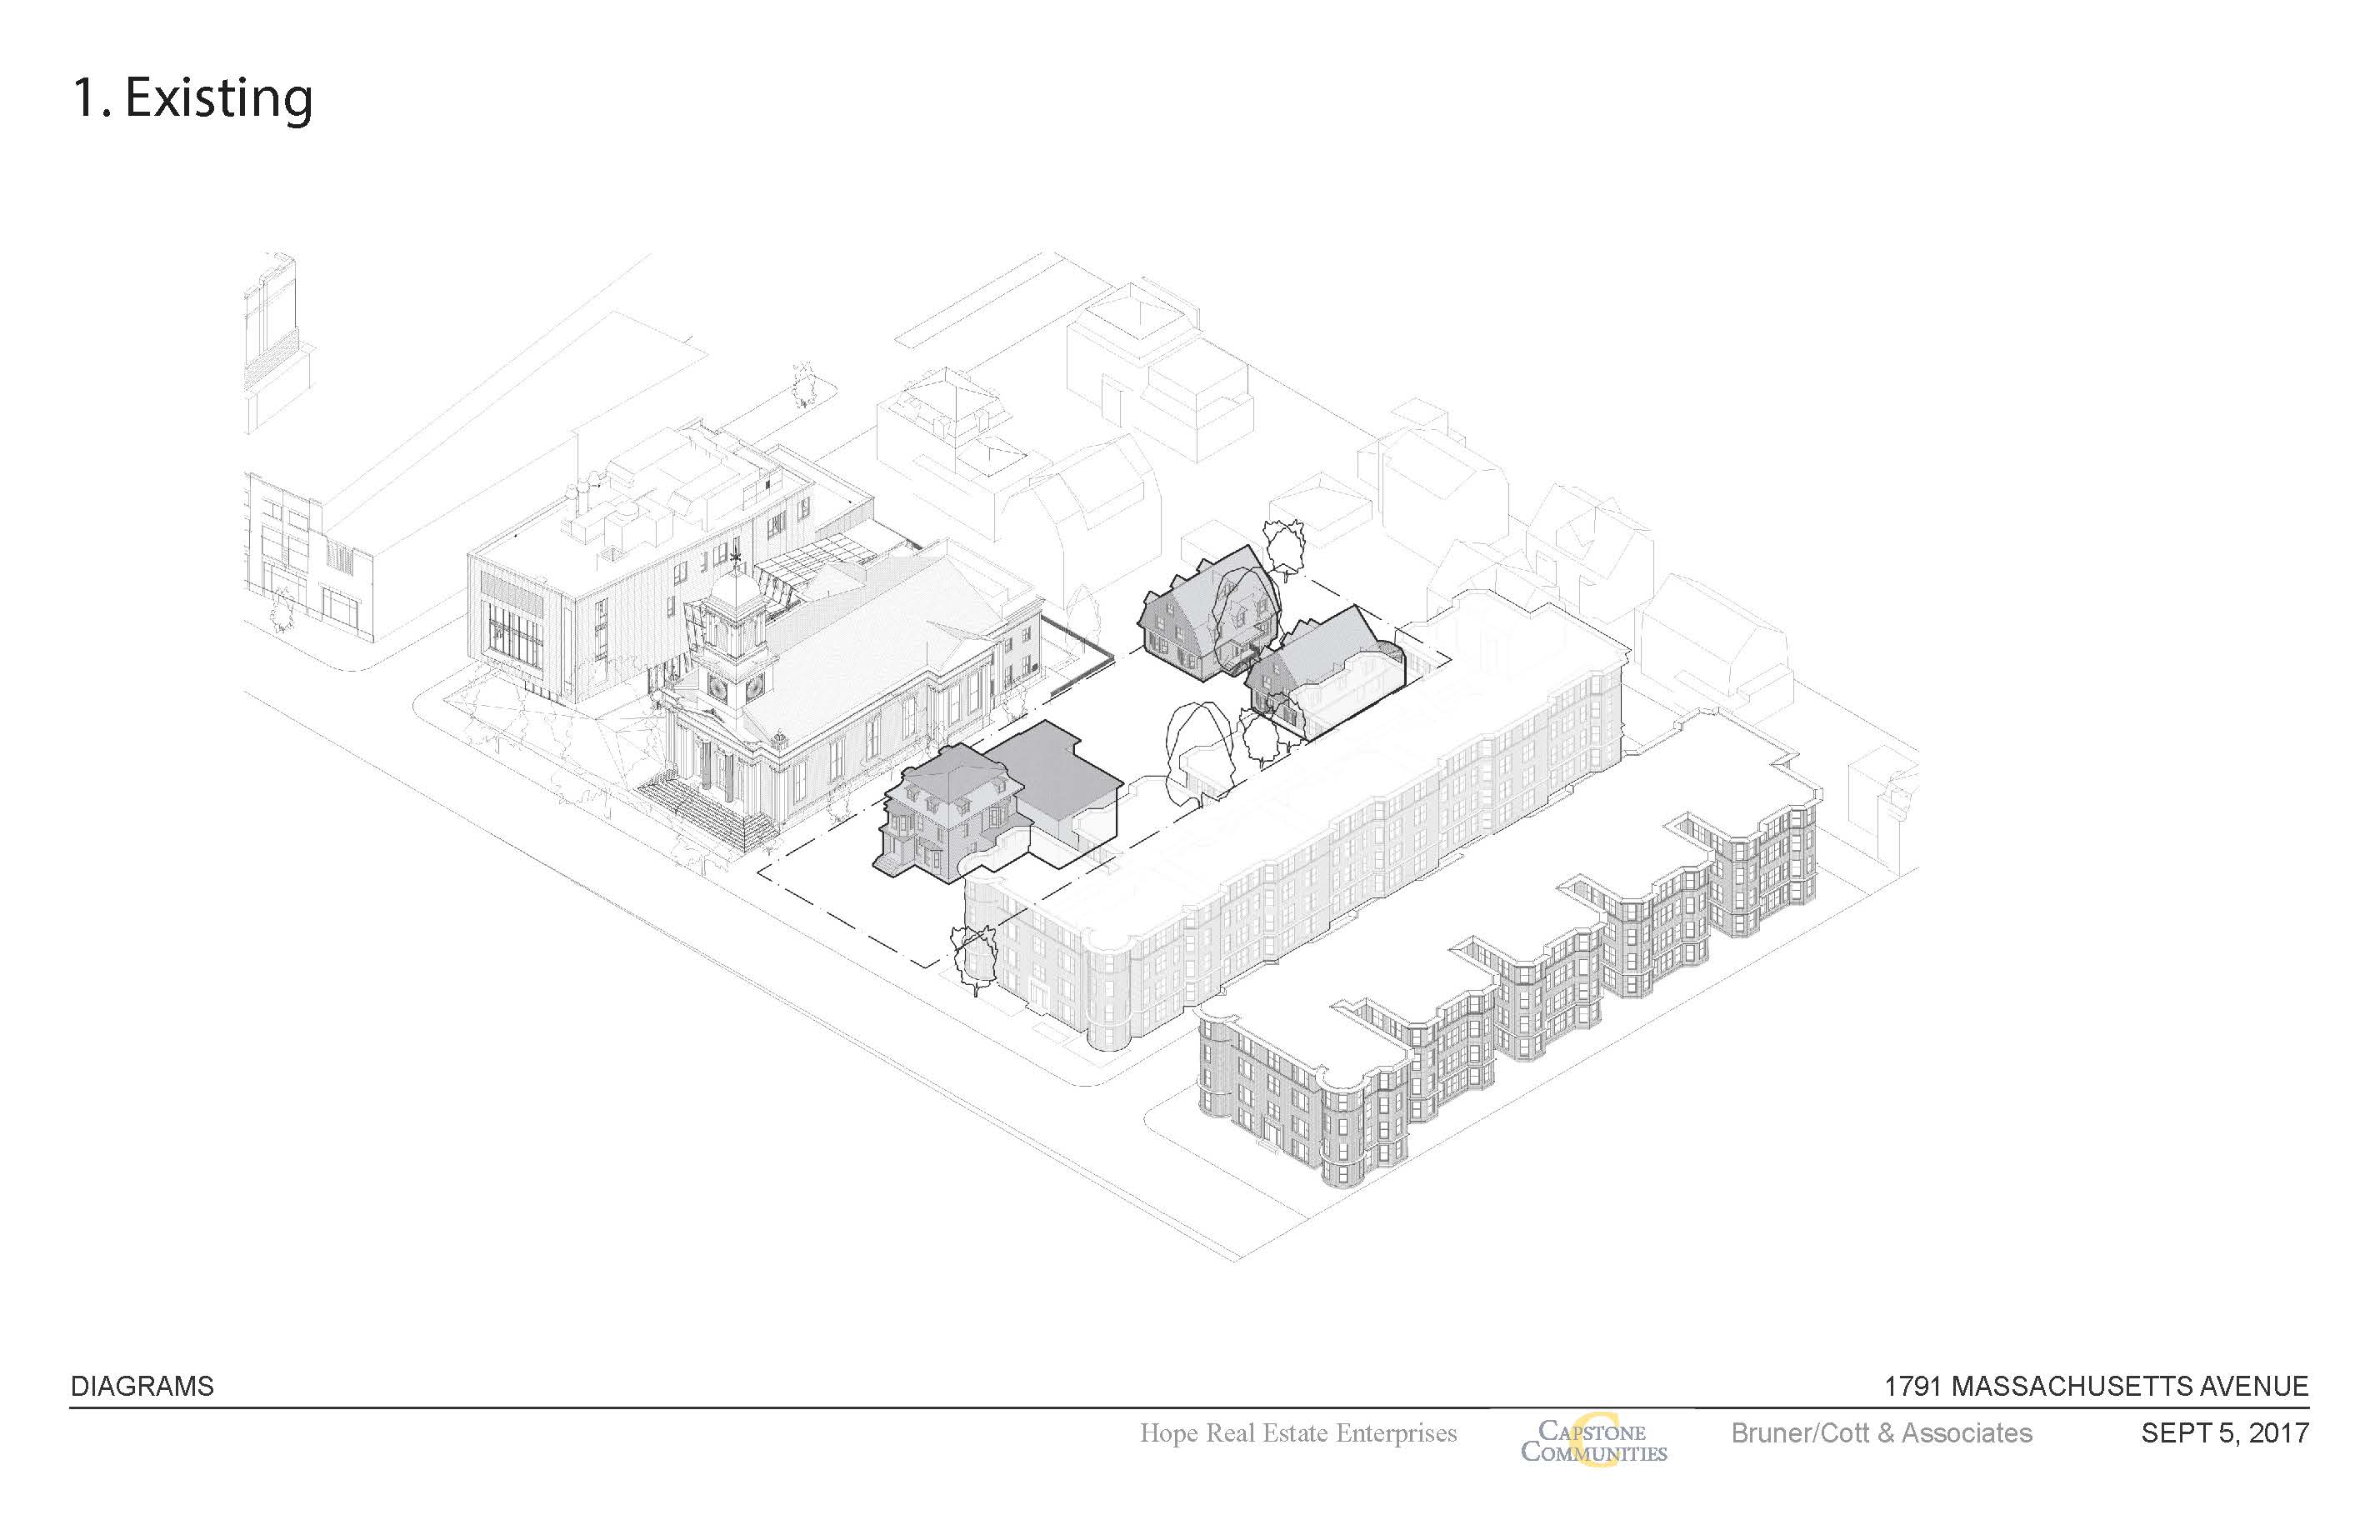 Frost Terrace affordable housing project in Cambridge, Mass. site plan